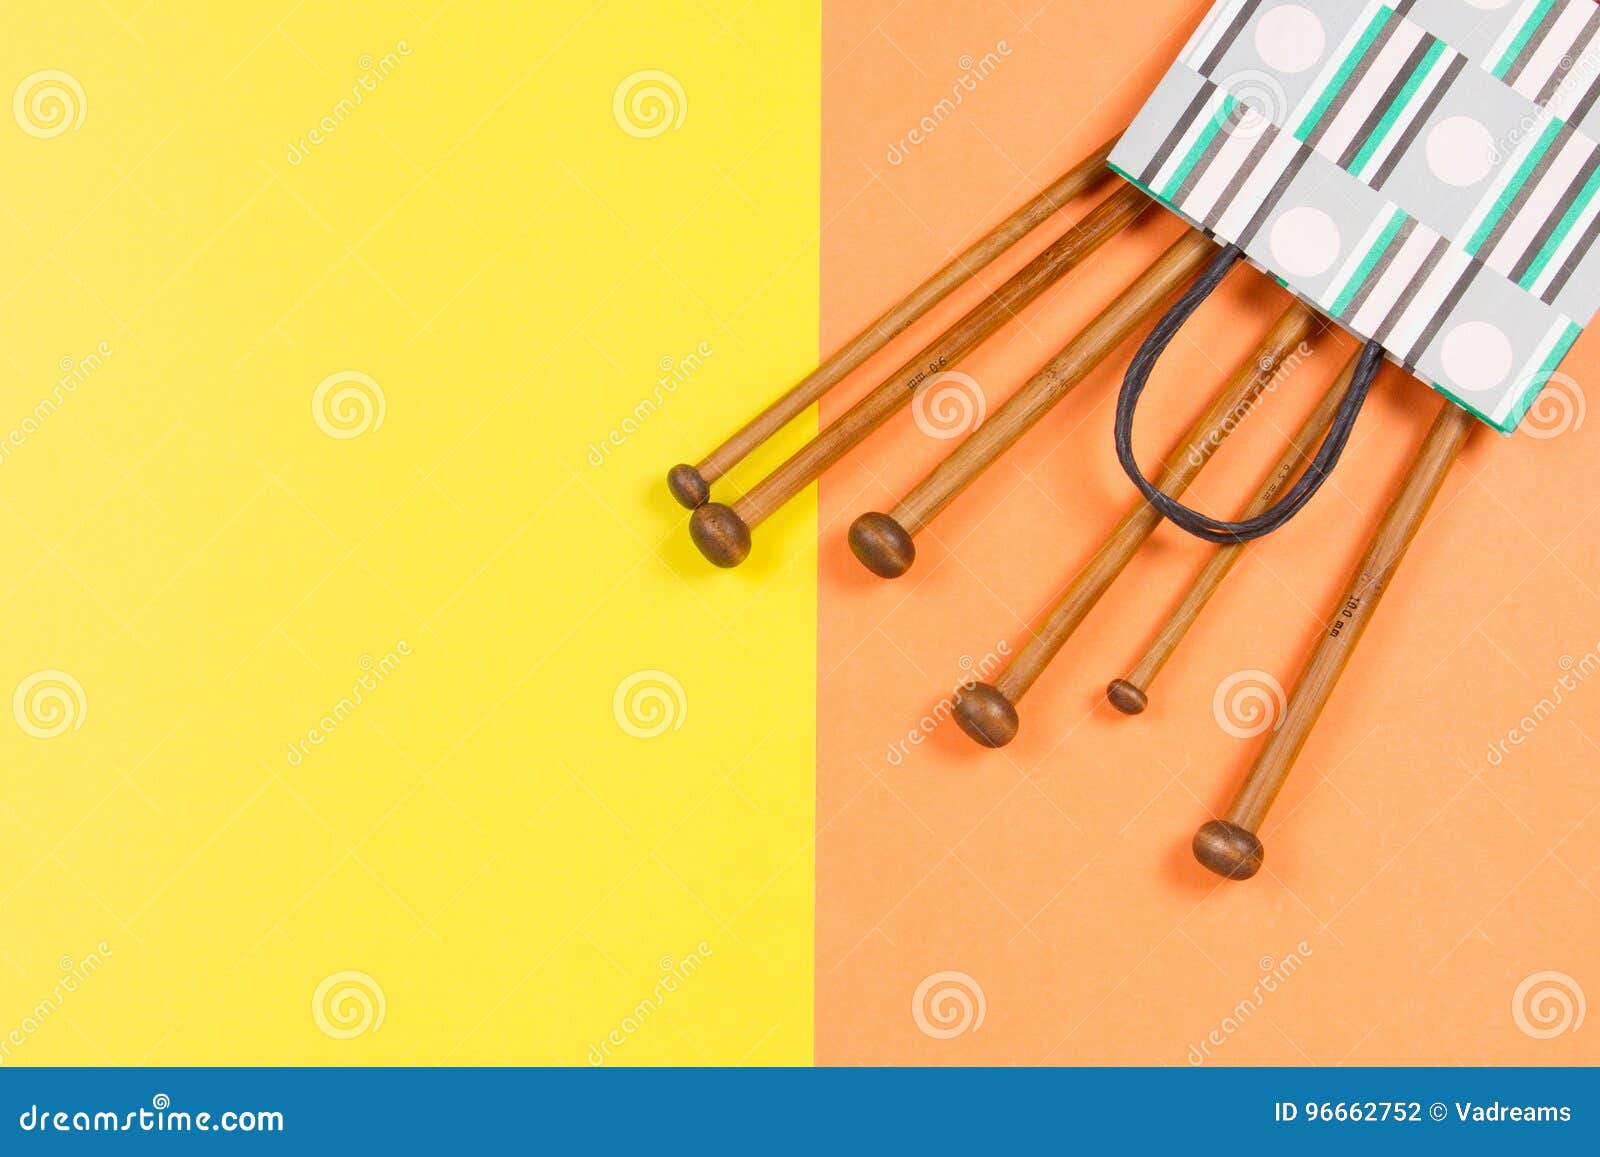 Wooden knitting needles on yellow and orange background. Top view